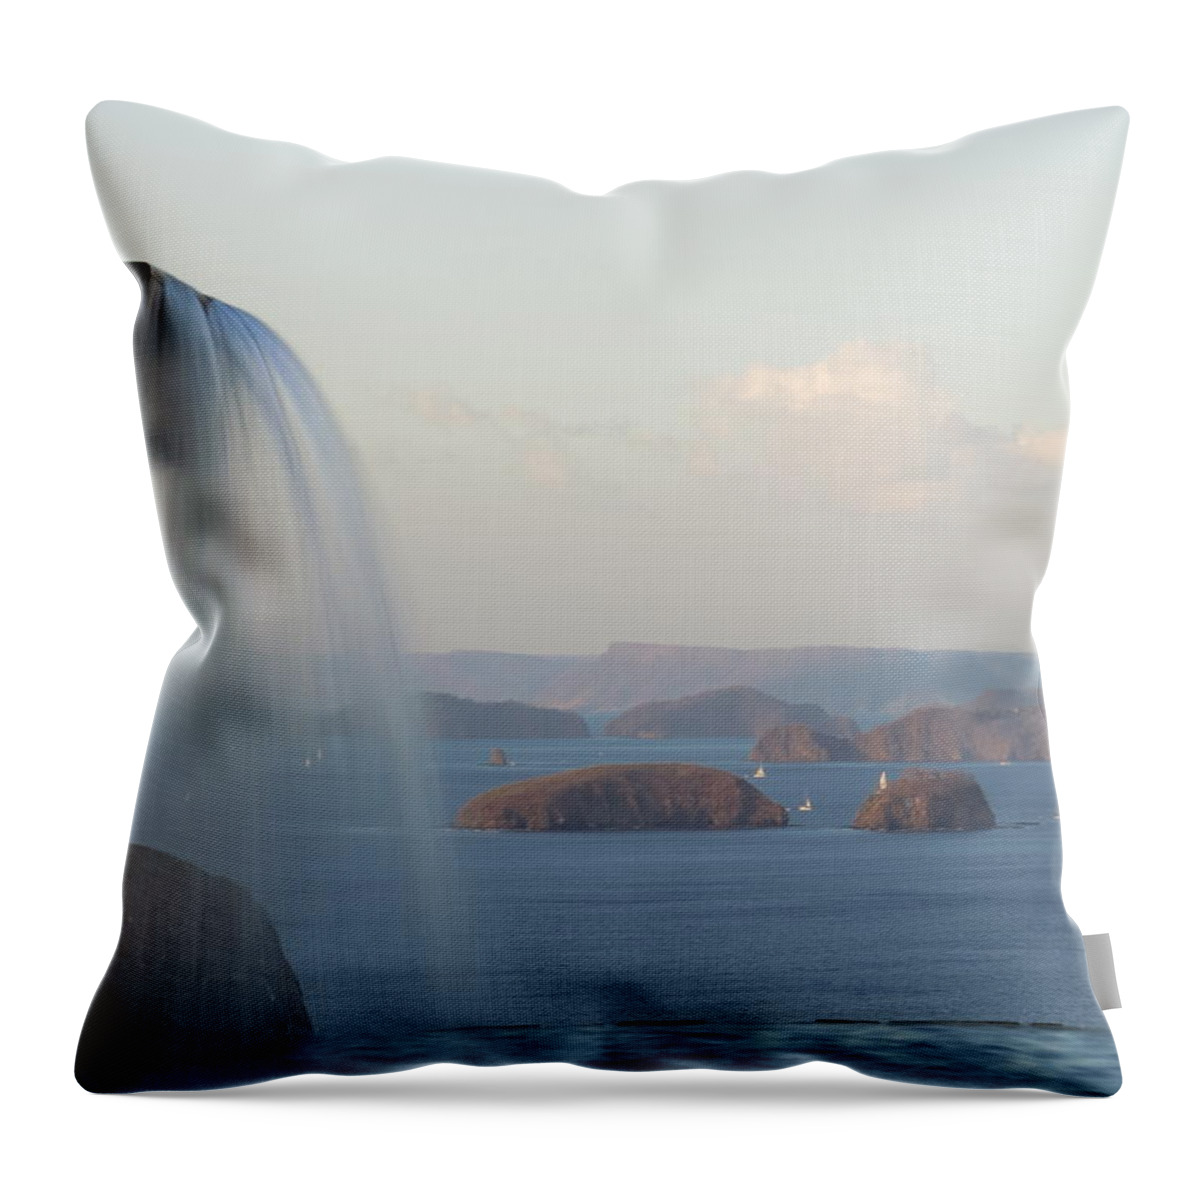 Waterfall Throw Pillow featuring the photograph Papagayo by Jessica Myscofski